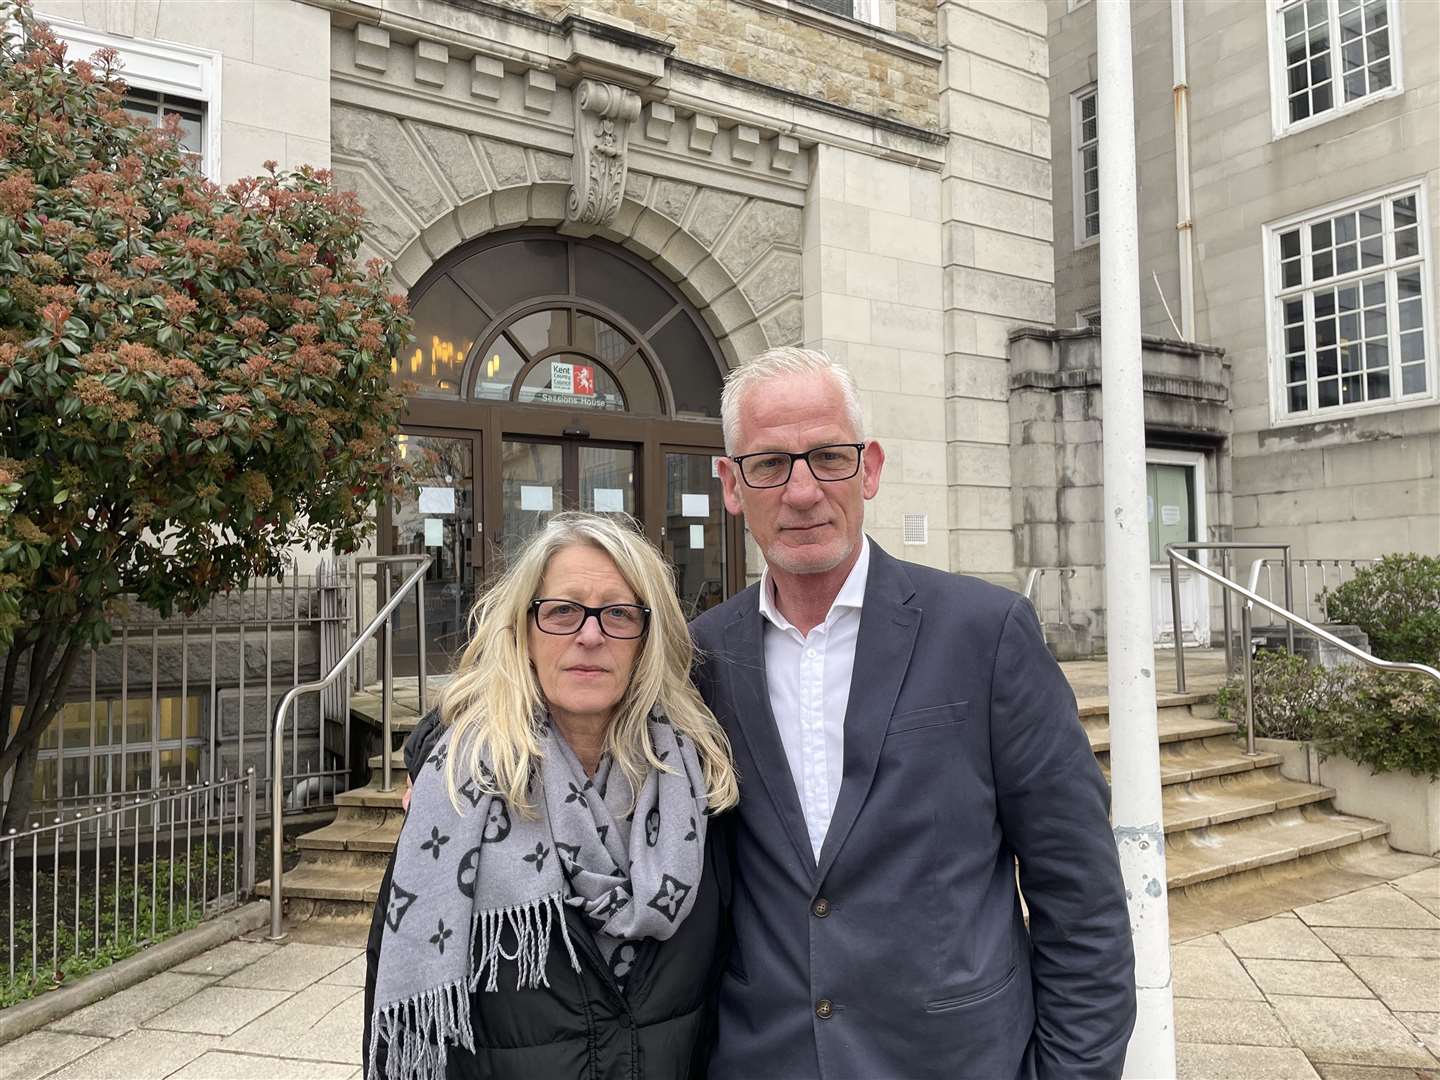 Anna Kerley with her partner Dean Skirrow outside County Hall in Maidstone yesterday